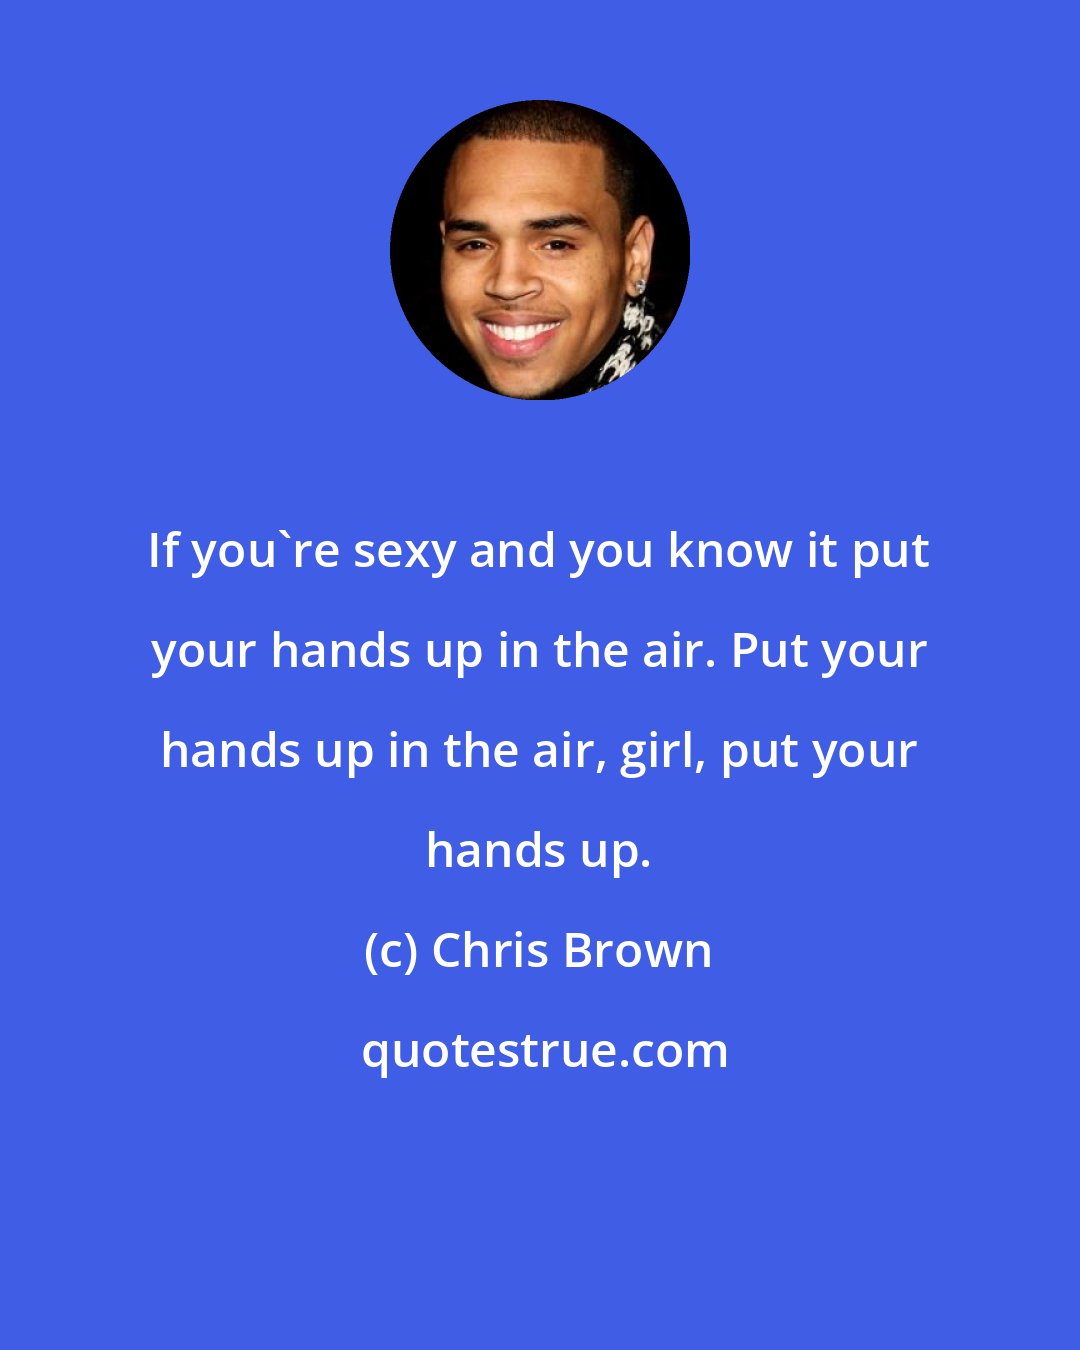 Chris Brown: If you're sexy and you know it put your hands up in the air. Put your hands up in the air, girl, put your hands up.